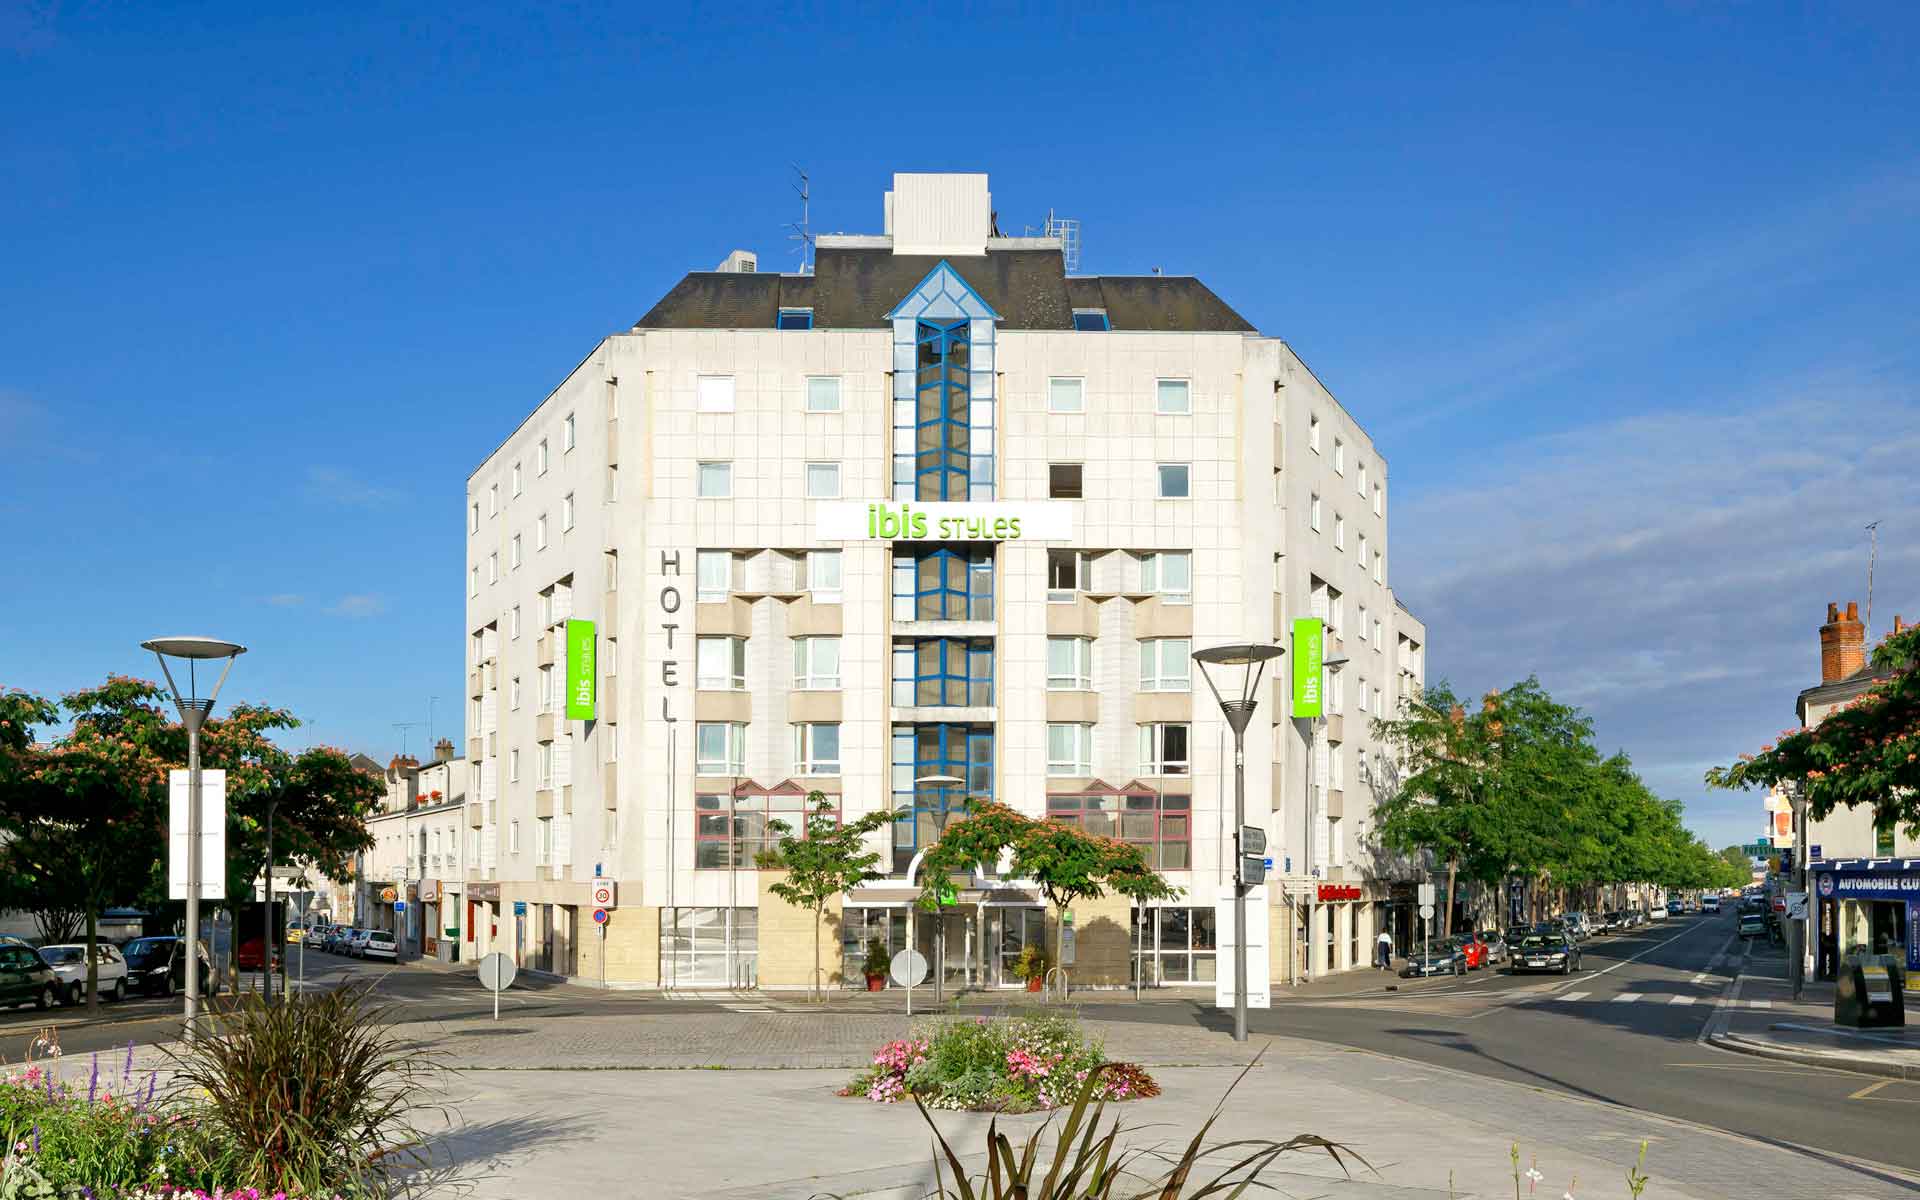 Groupe MyHotels – Ibis Styles Tours – Façade